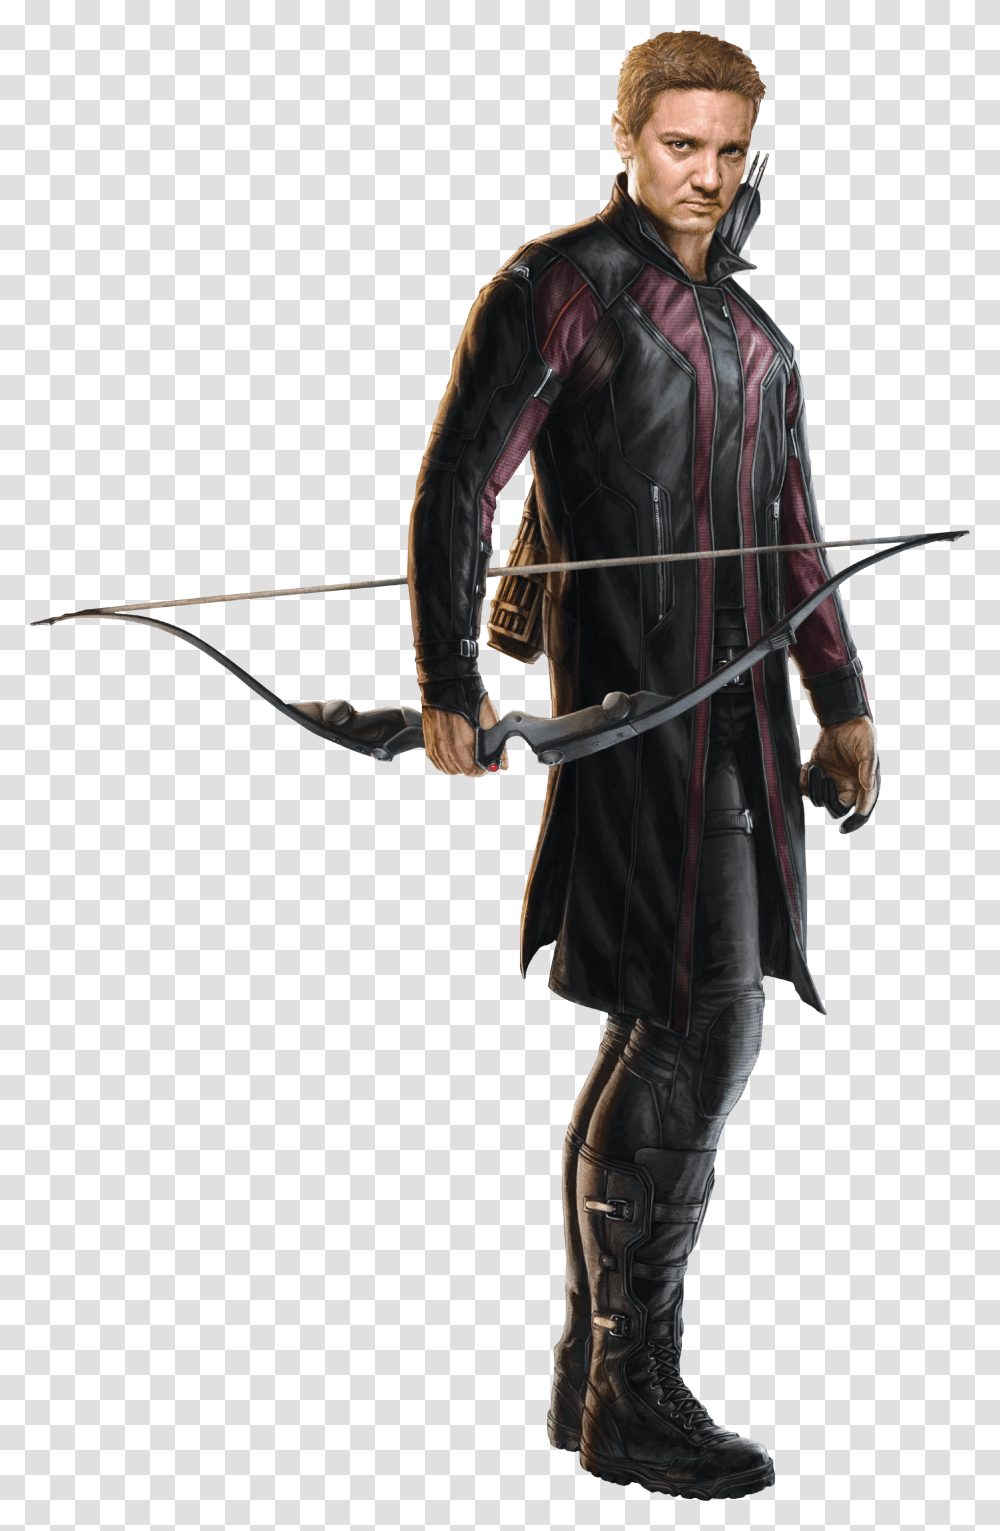 Hawkeye Free Download Hawkeye Avengers, Person, Human, Bow, Whip Transparent Png